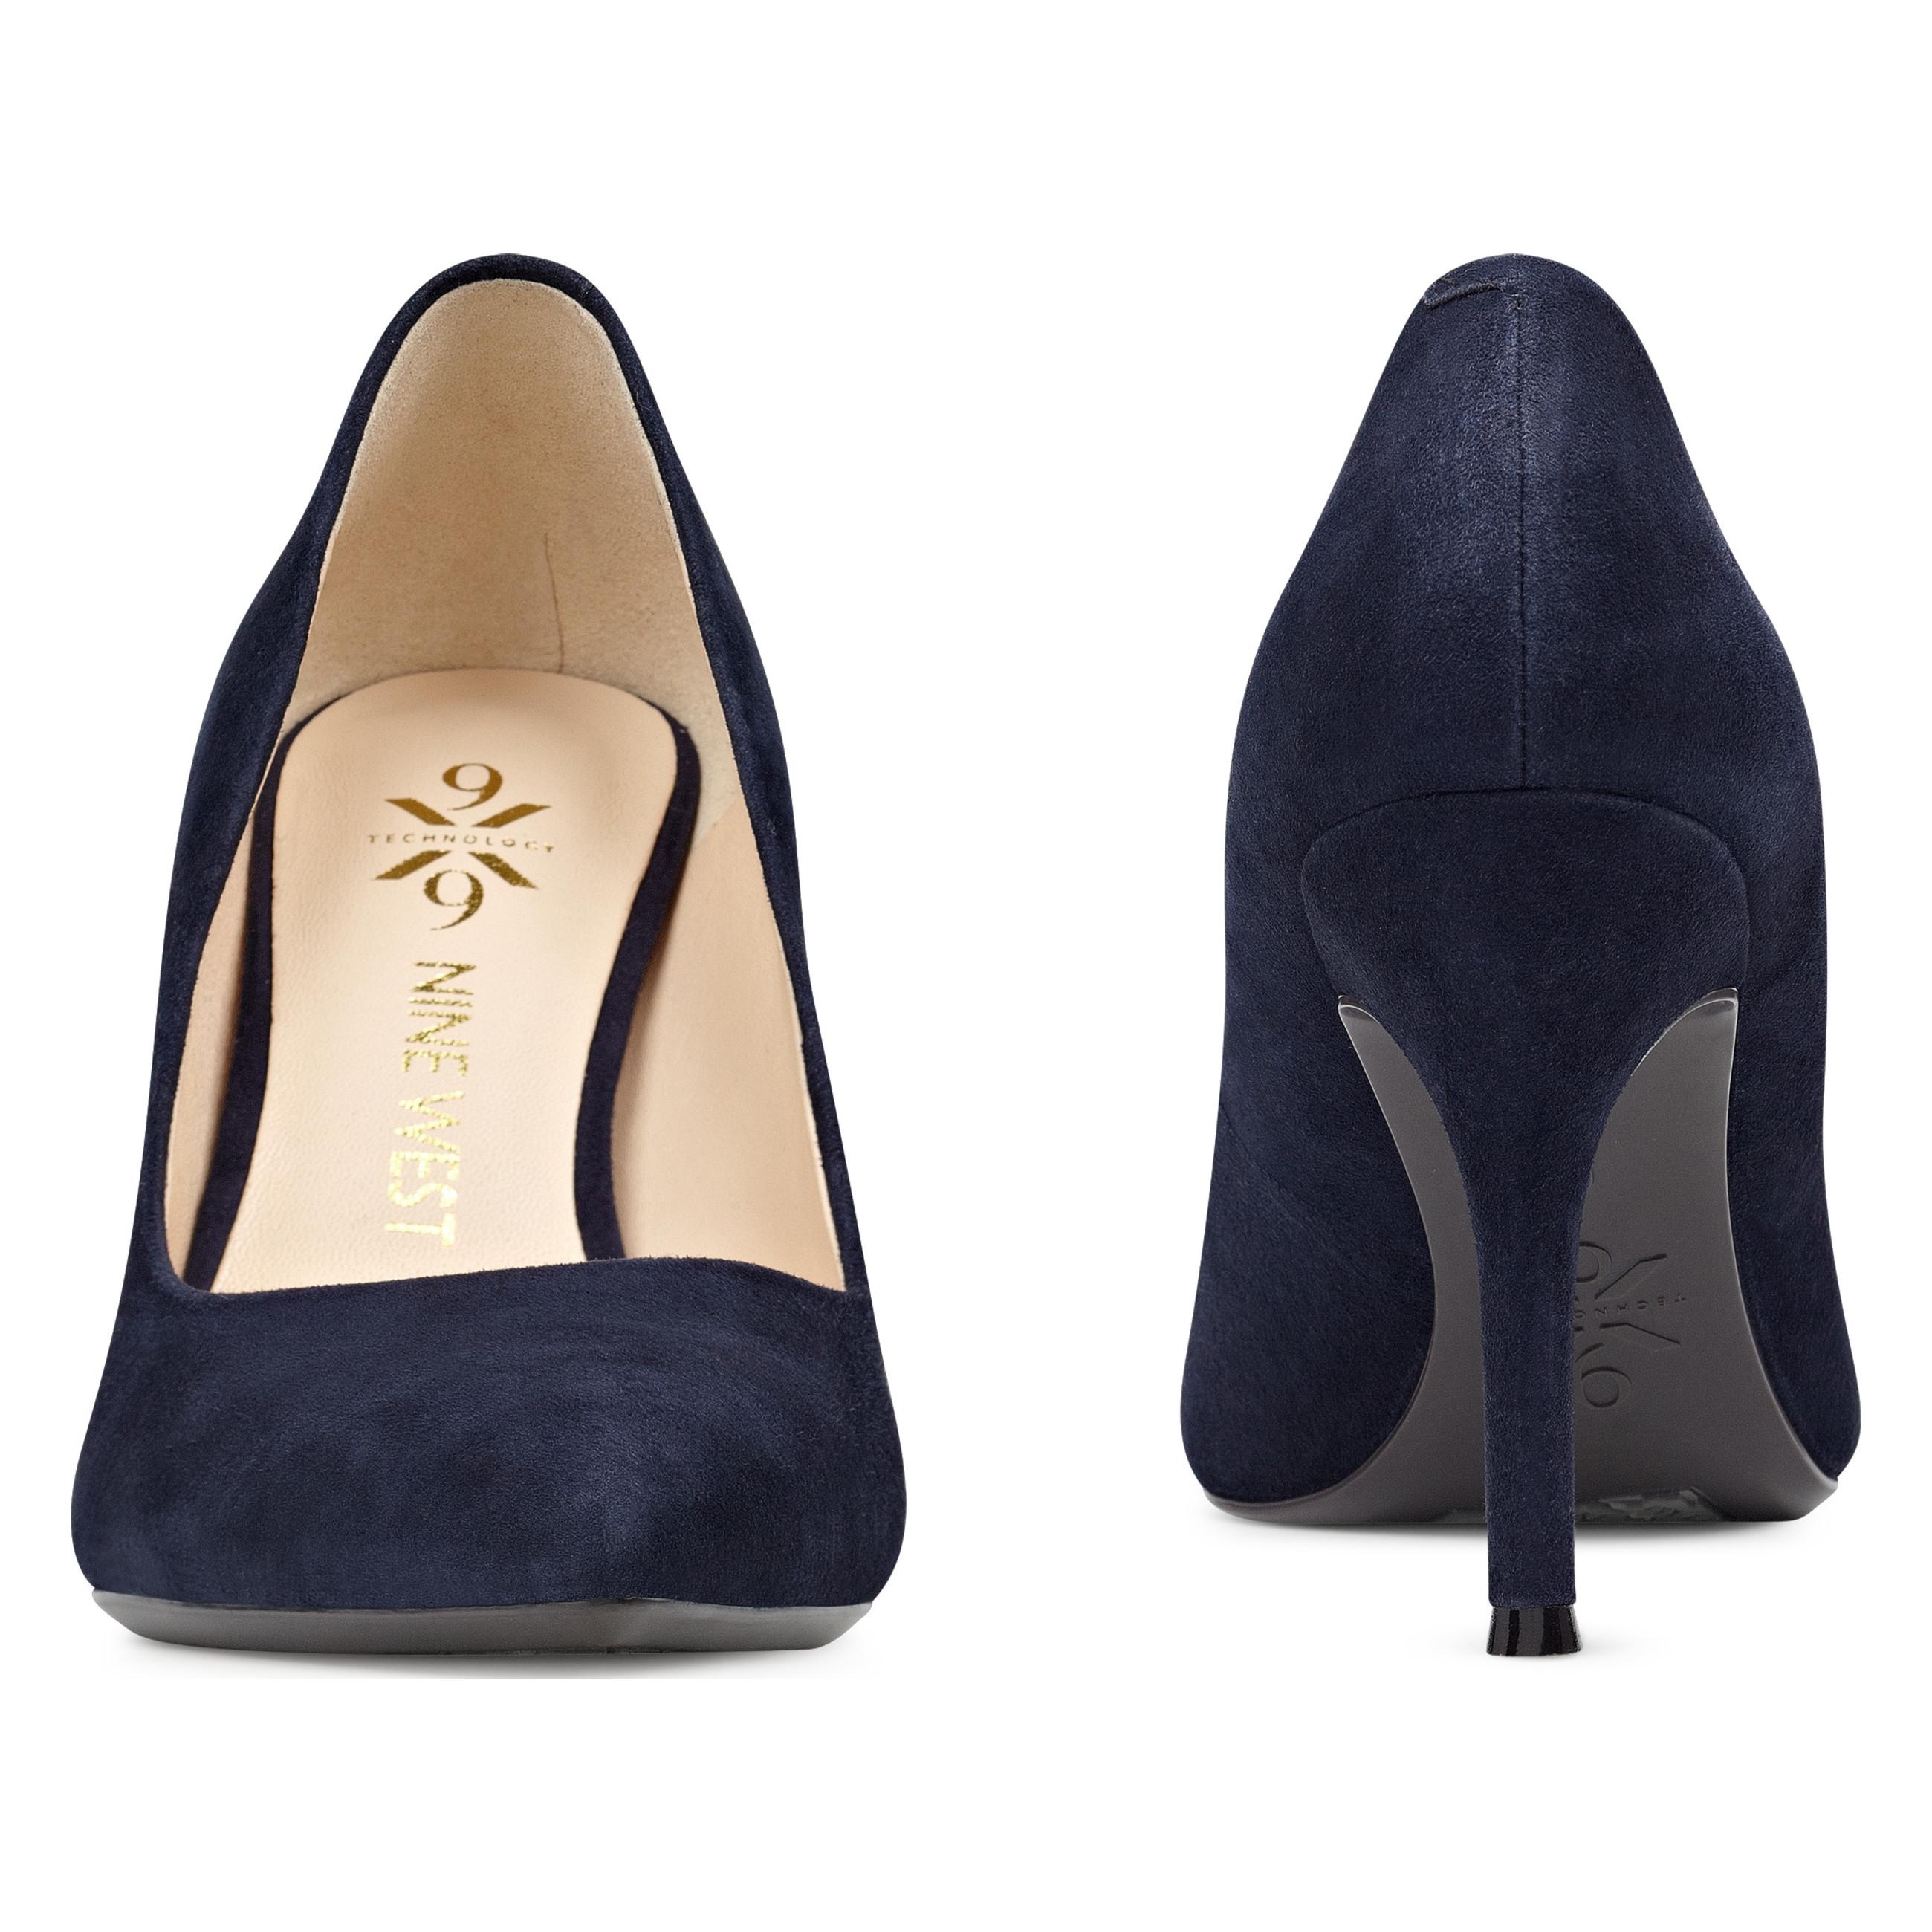 Nine West Synthetic Flagship High Heel Court Shoes in French Navy Suede ...